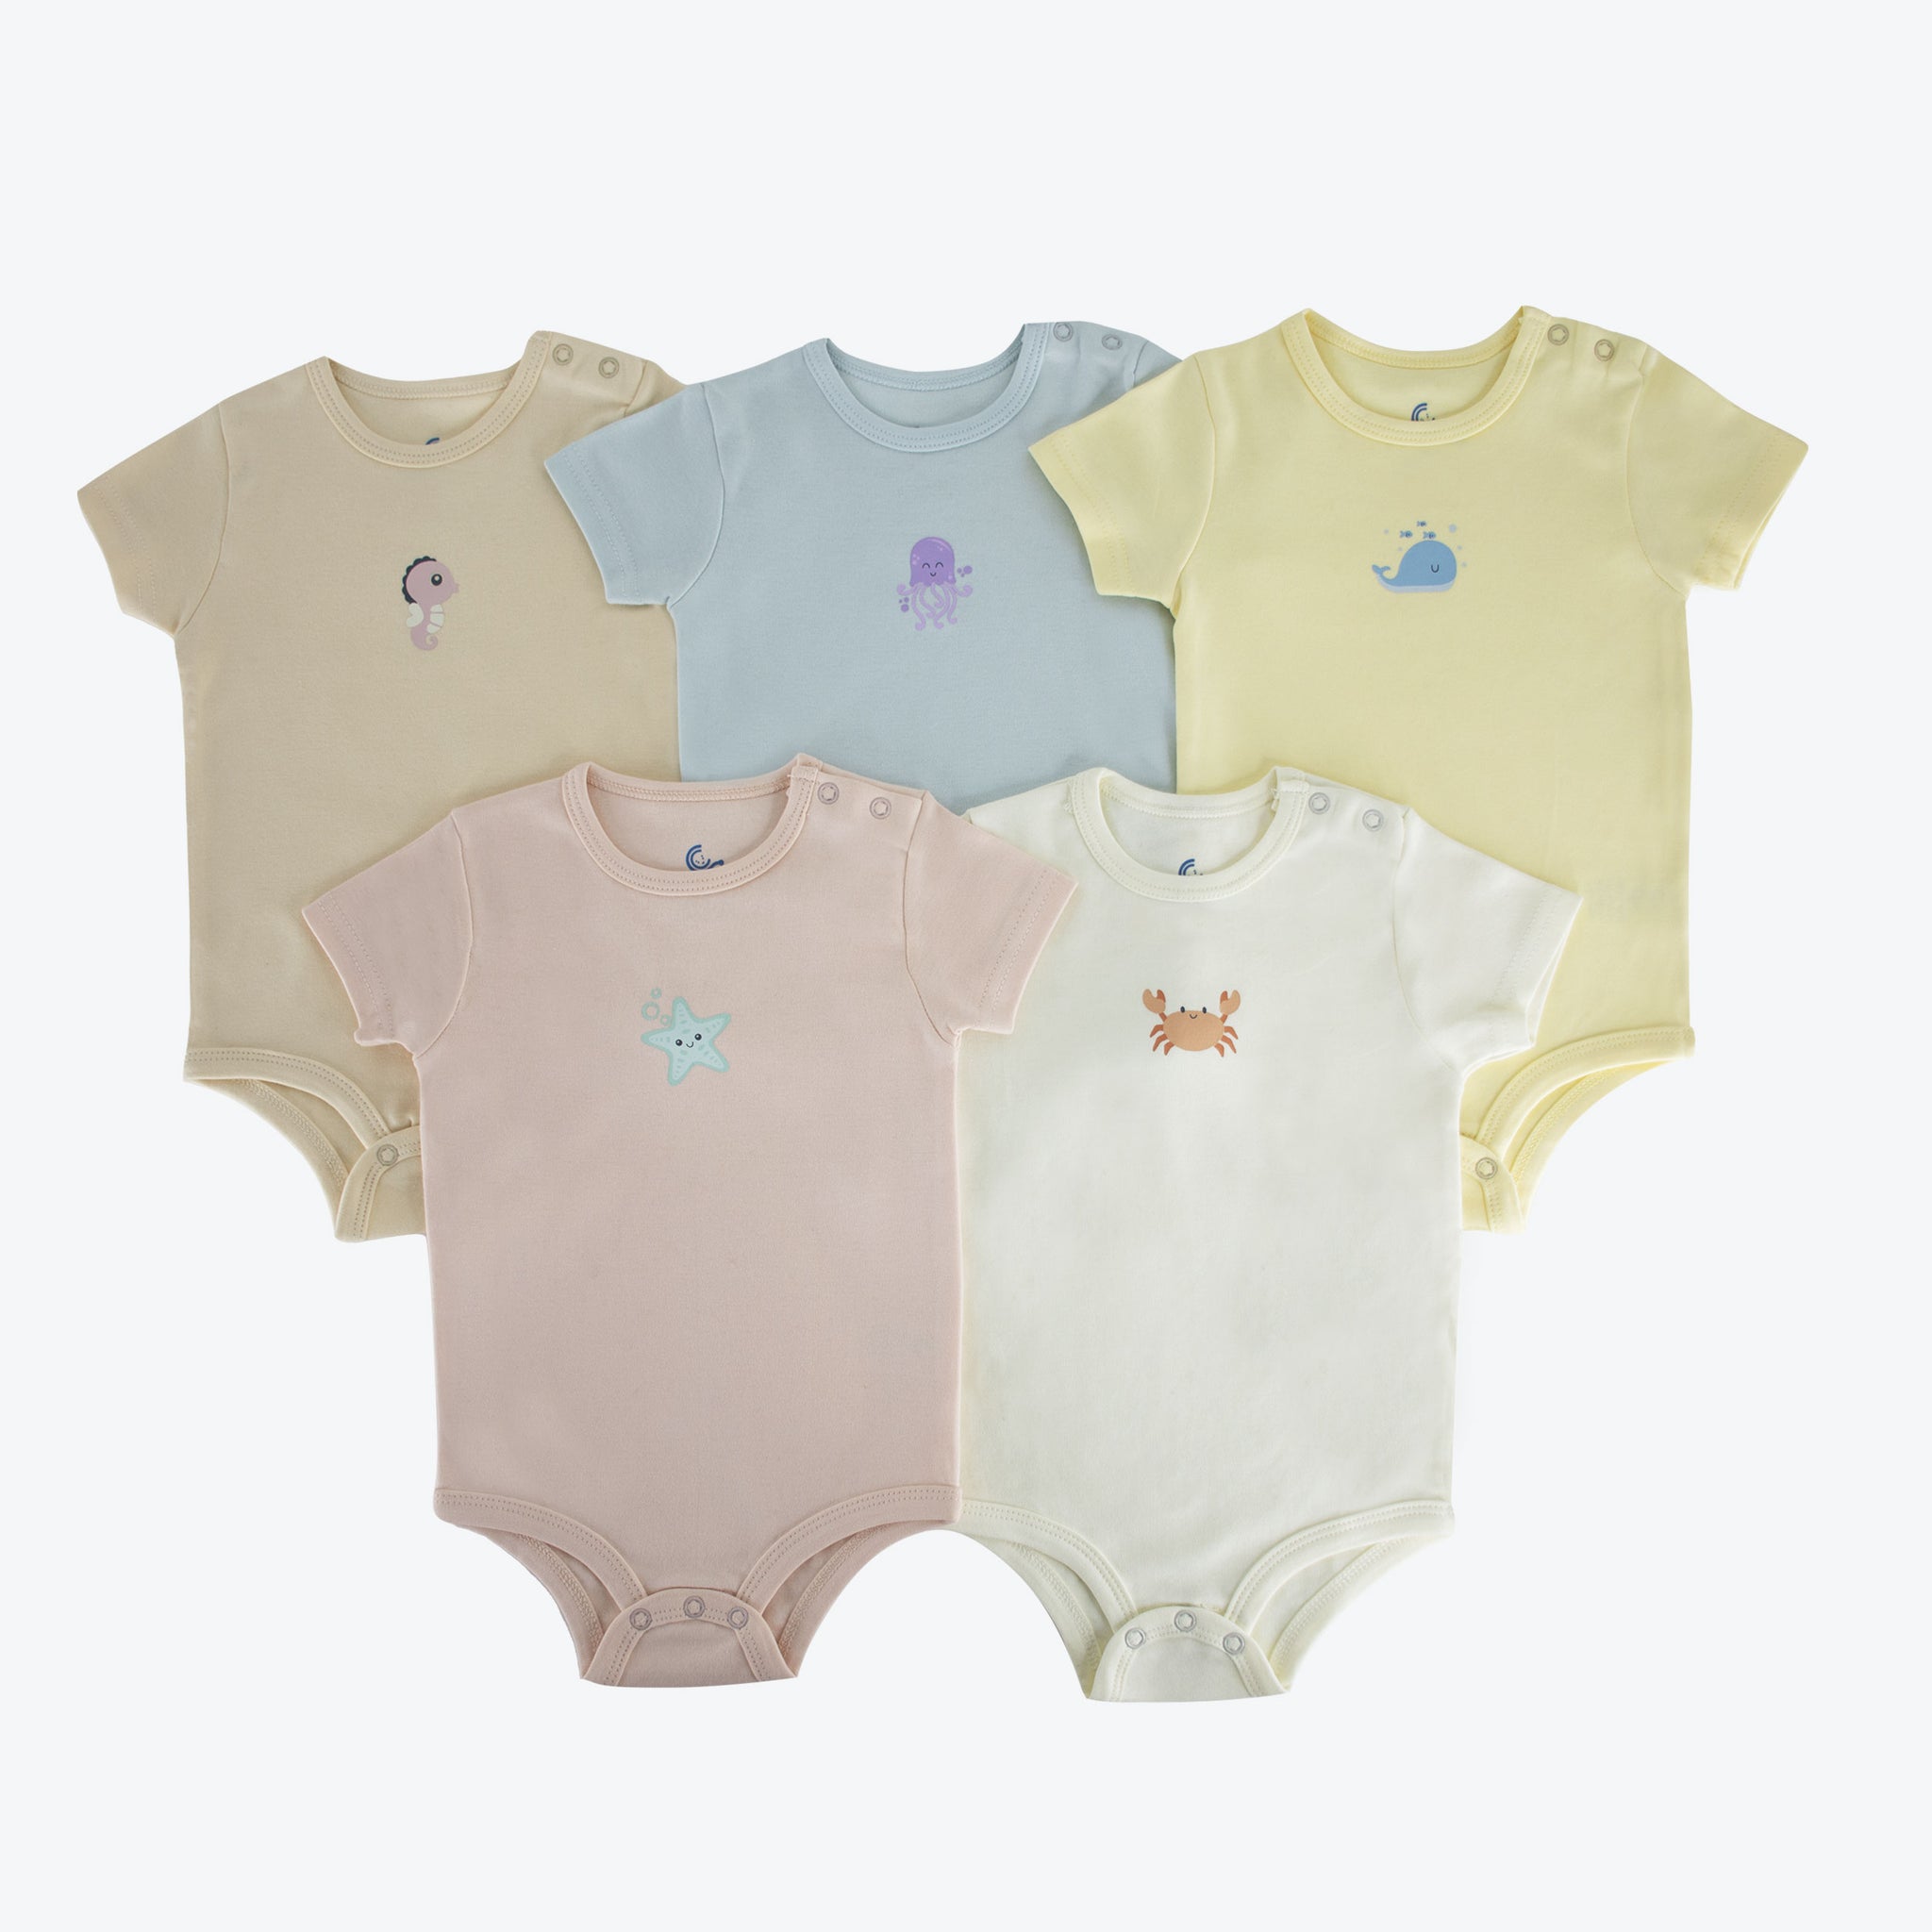 Set of 5 baby bodysuits with cute sea animals